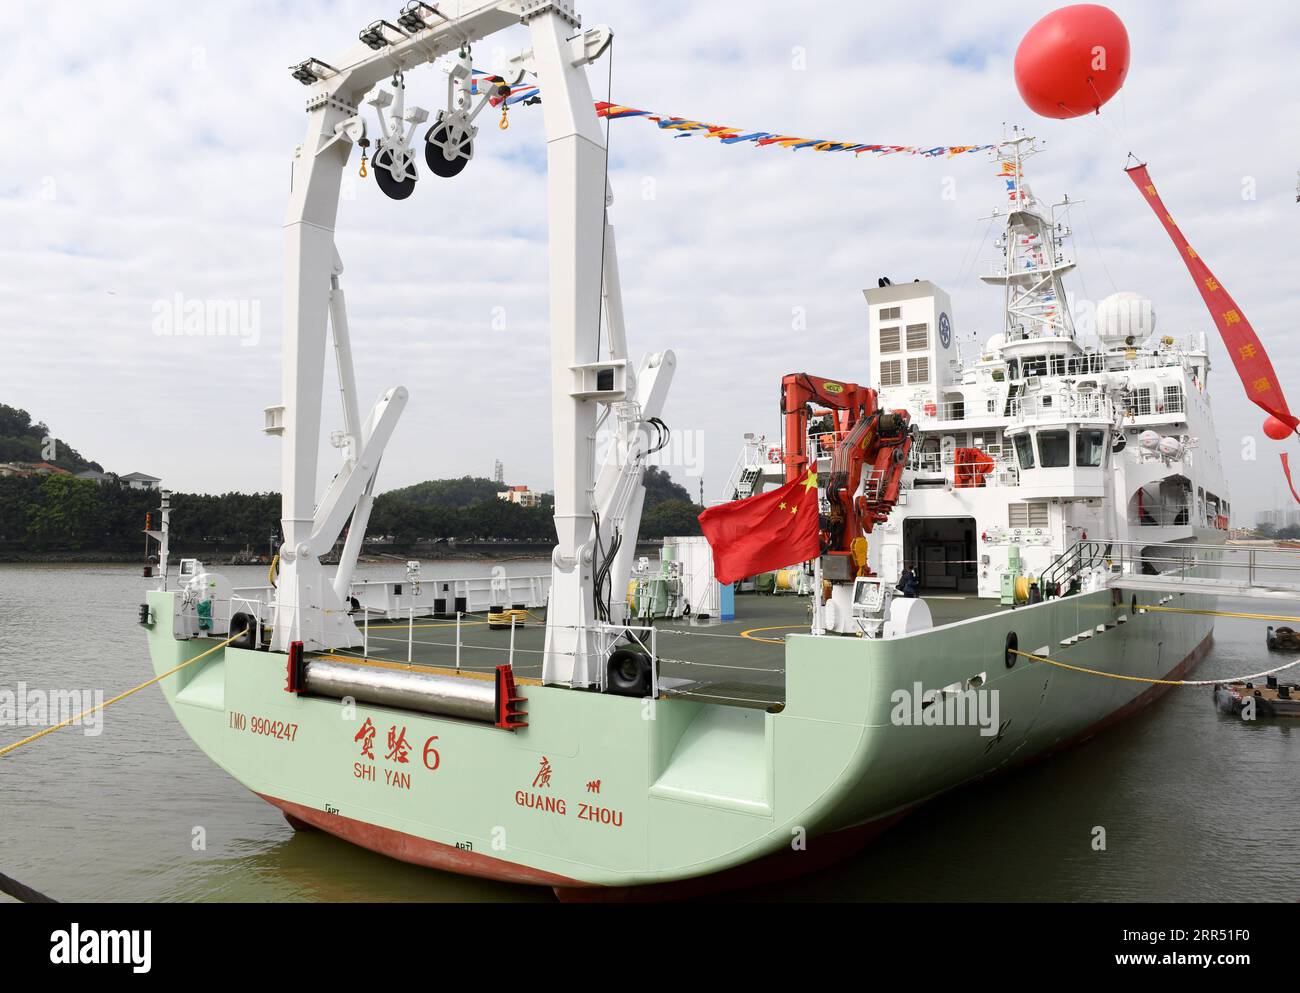 201219 -- BEIJING, Dec. 19, 2020 -- The Shiyan 6 scientific research ship is delivered in Guangzhou, capital of south China s Guangdong Province, Dec. 18, 2020. The oceangoing geophysical research ship was added to China s fleet of marine research vessels on Friday. It is the country s first scientific research vessel focusing on geophysical exploration. Built at a cost of 500 million yuan 76.5 million U.S. dollars, the vessel is 90.6 meters long and 17 meters wide, with a maximum speed of 17 knots.  XINHUA PHOTOS OF THE DAY LuxHanxin PUBLICATIONxNOTxINxCHN Stock Photo